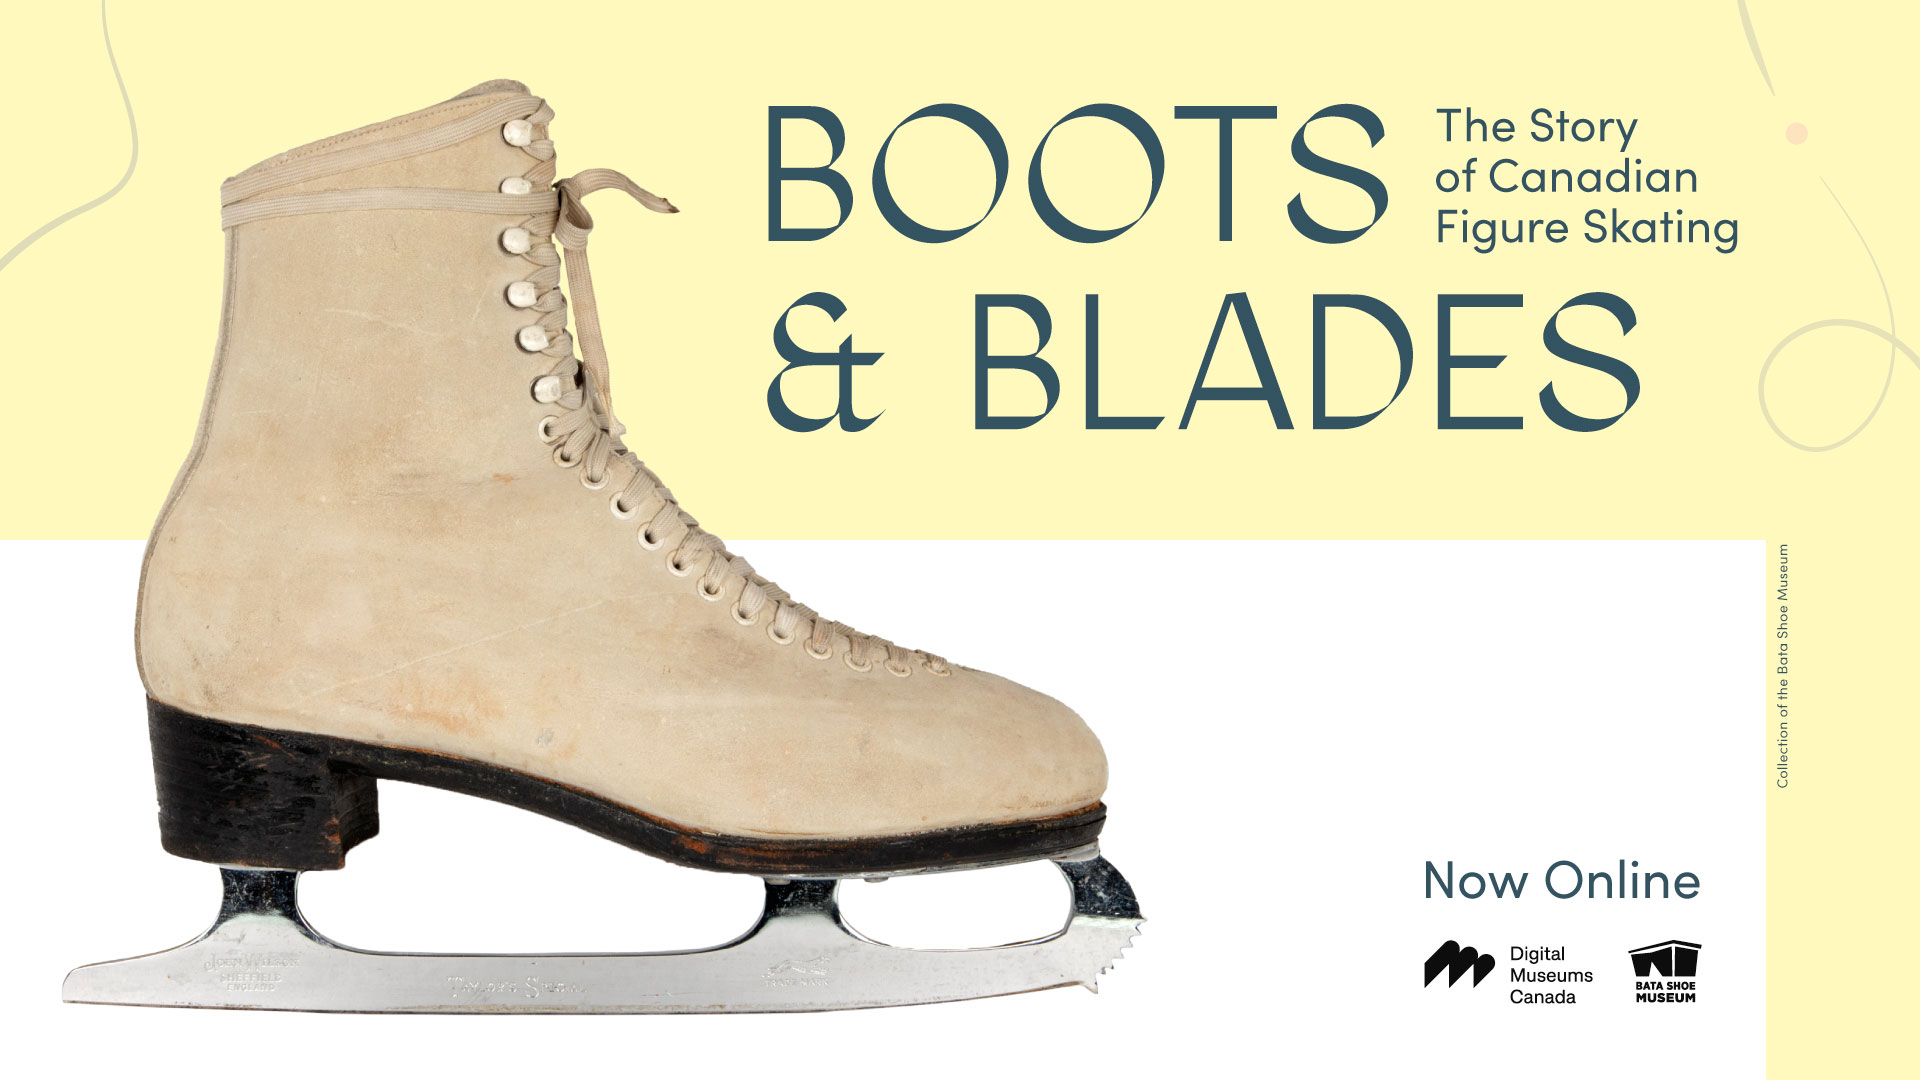 Boots & Blades: The Story of Canadian Figure Skating